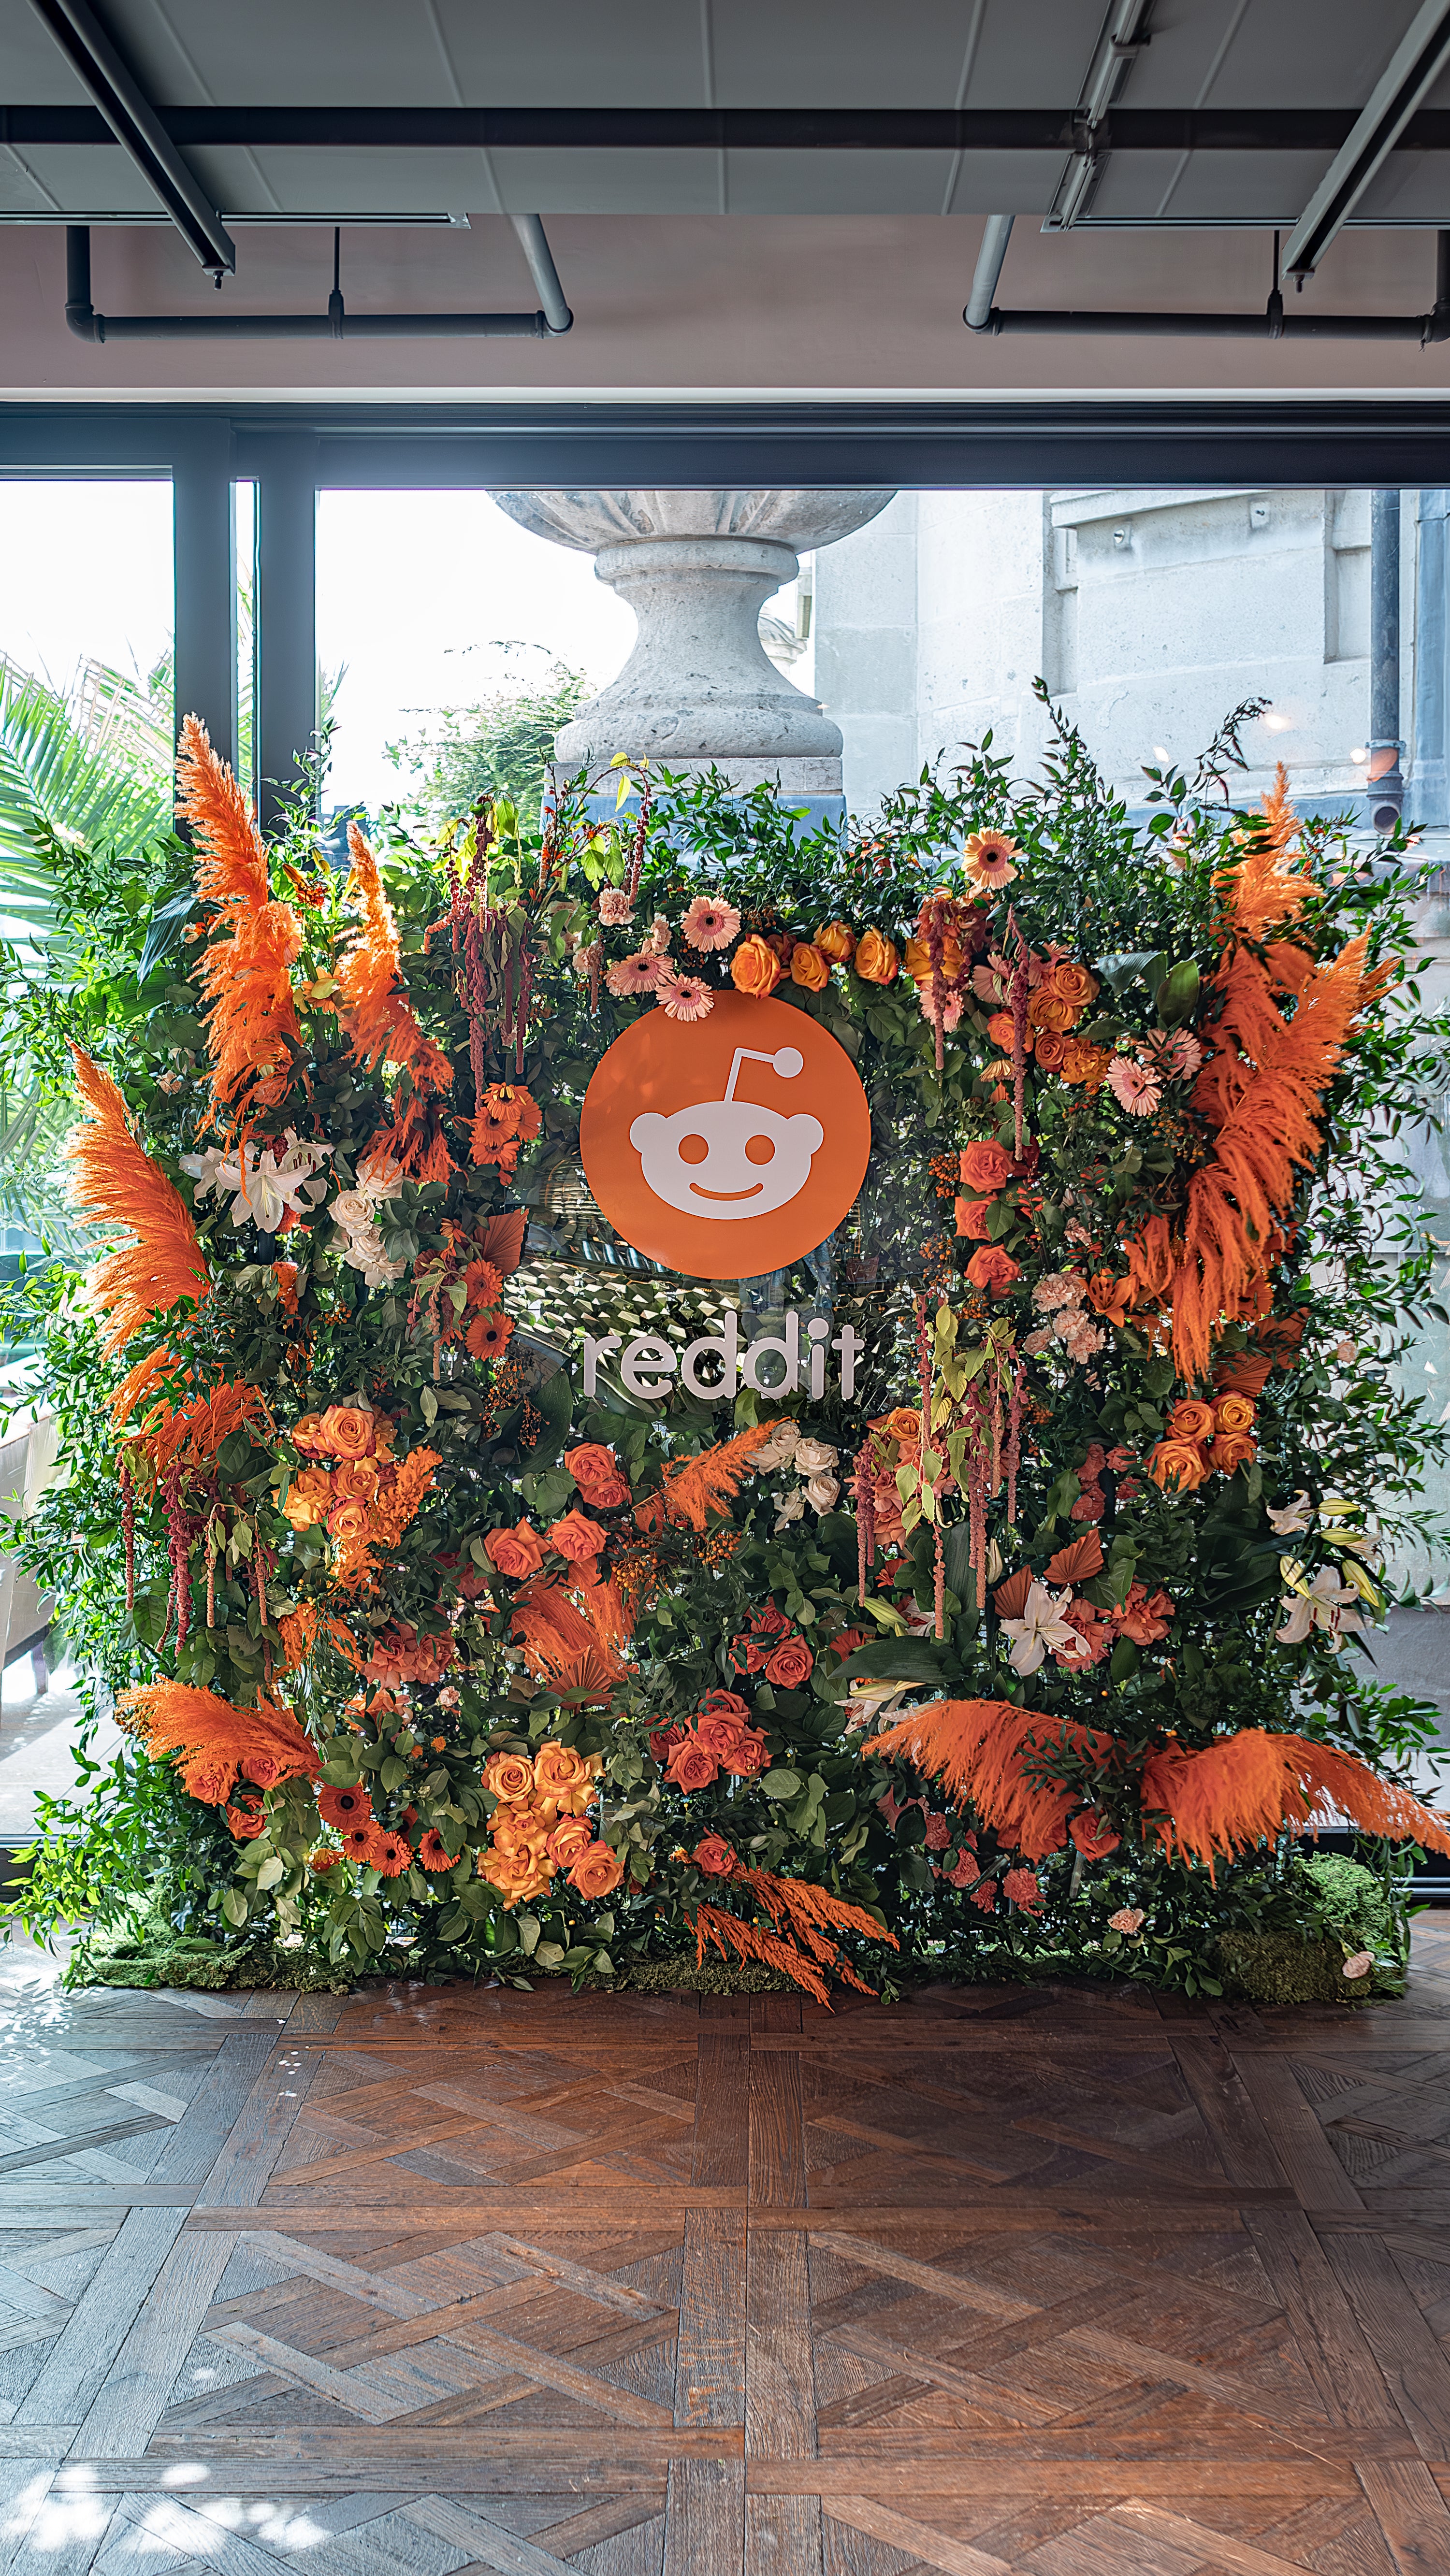 Amaranté crafted a bespoke floral wall in lively shades of orange and green for Reddit's event, brilliantly highlighting their distinctive brand colors.